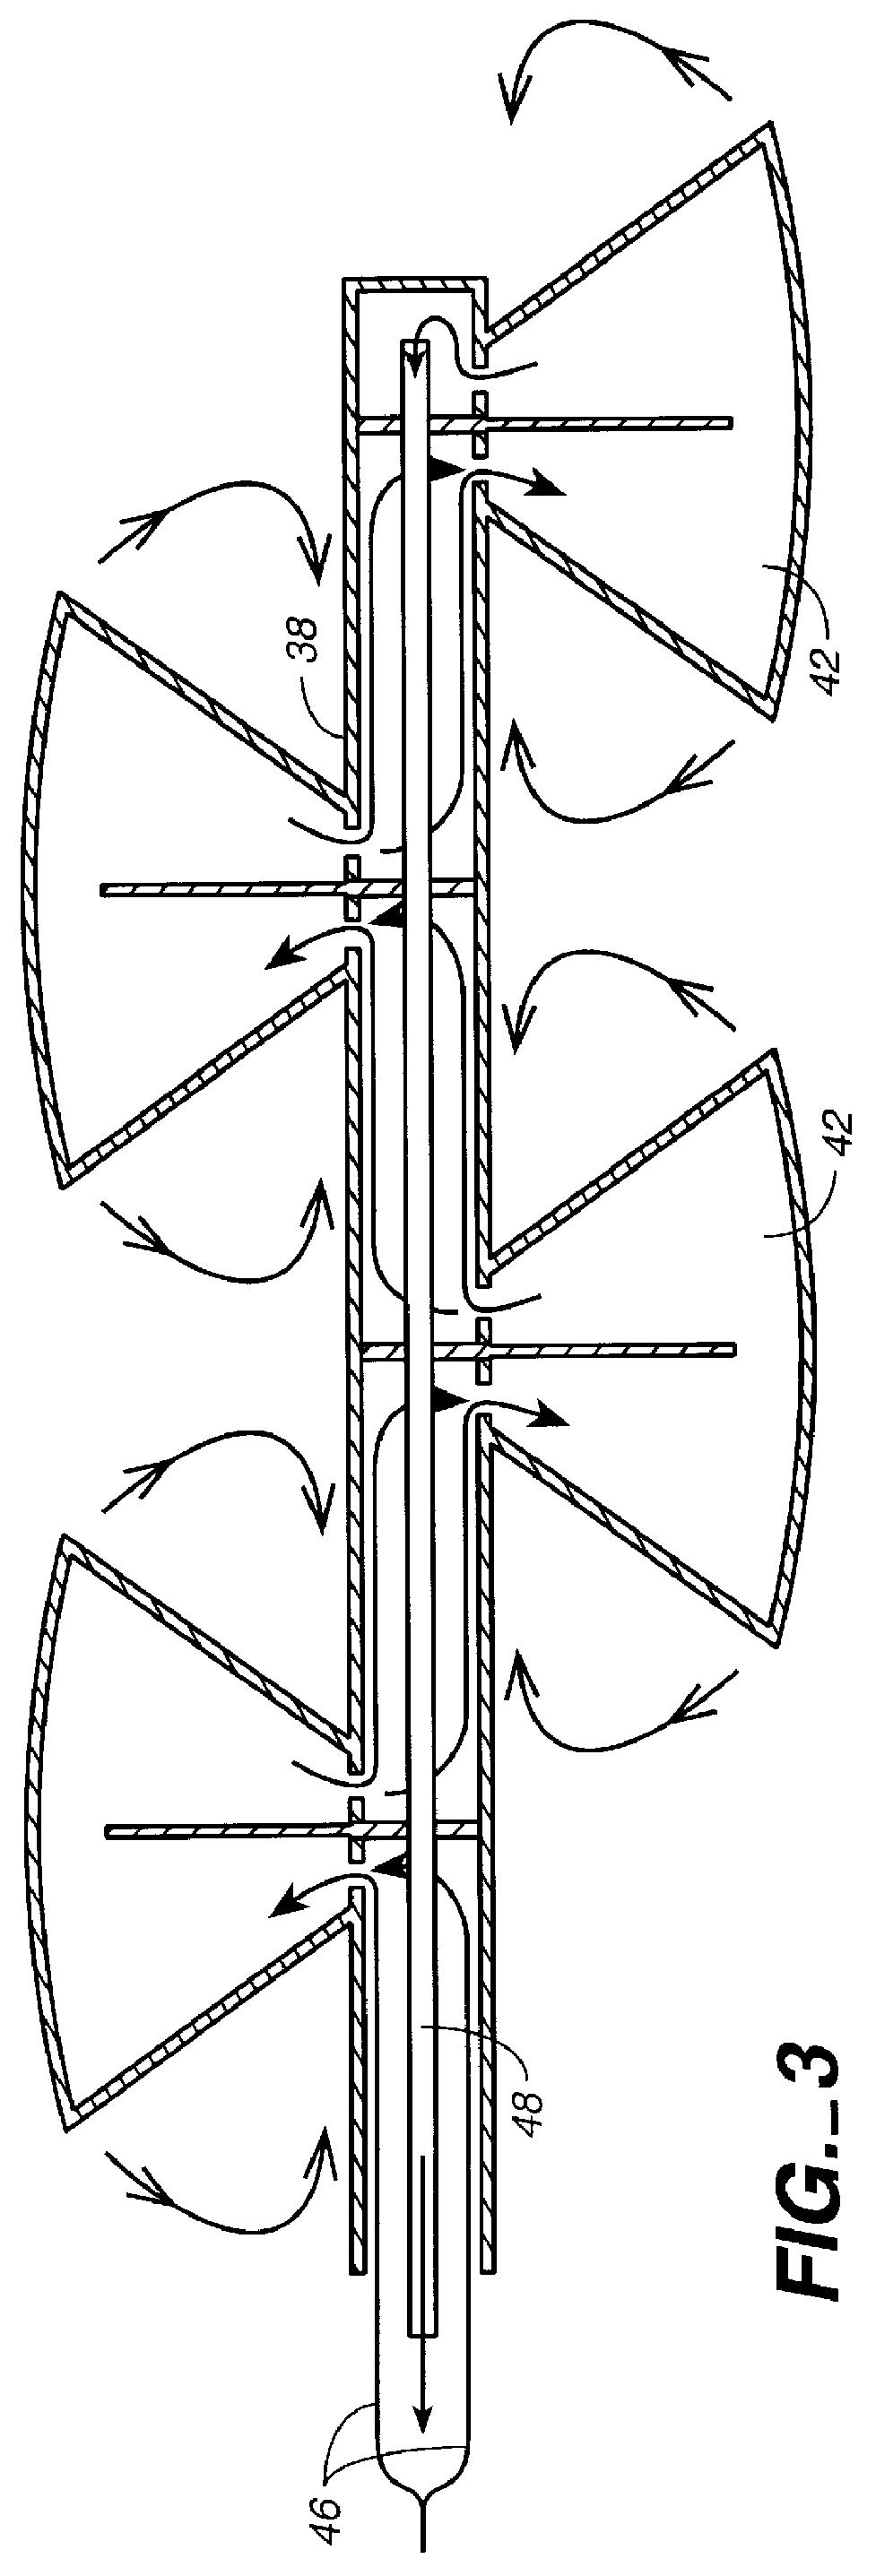 Apparatus for marinating meat products